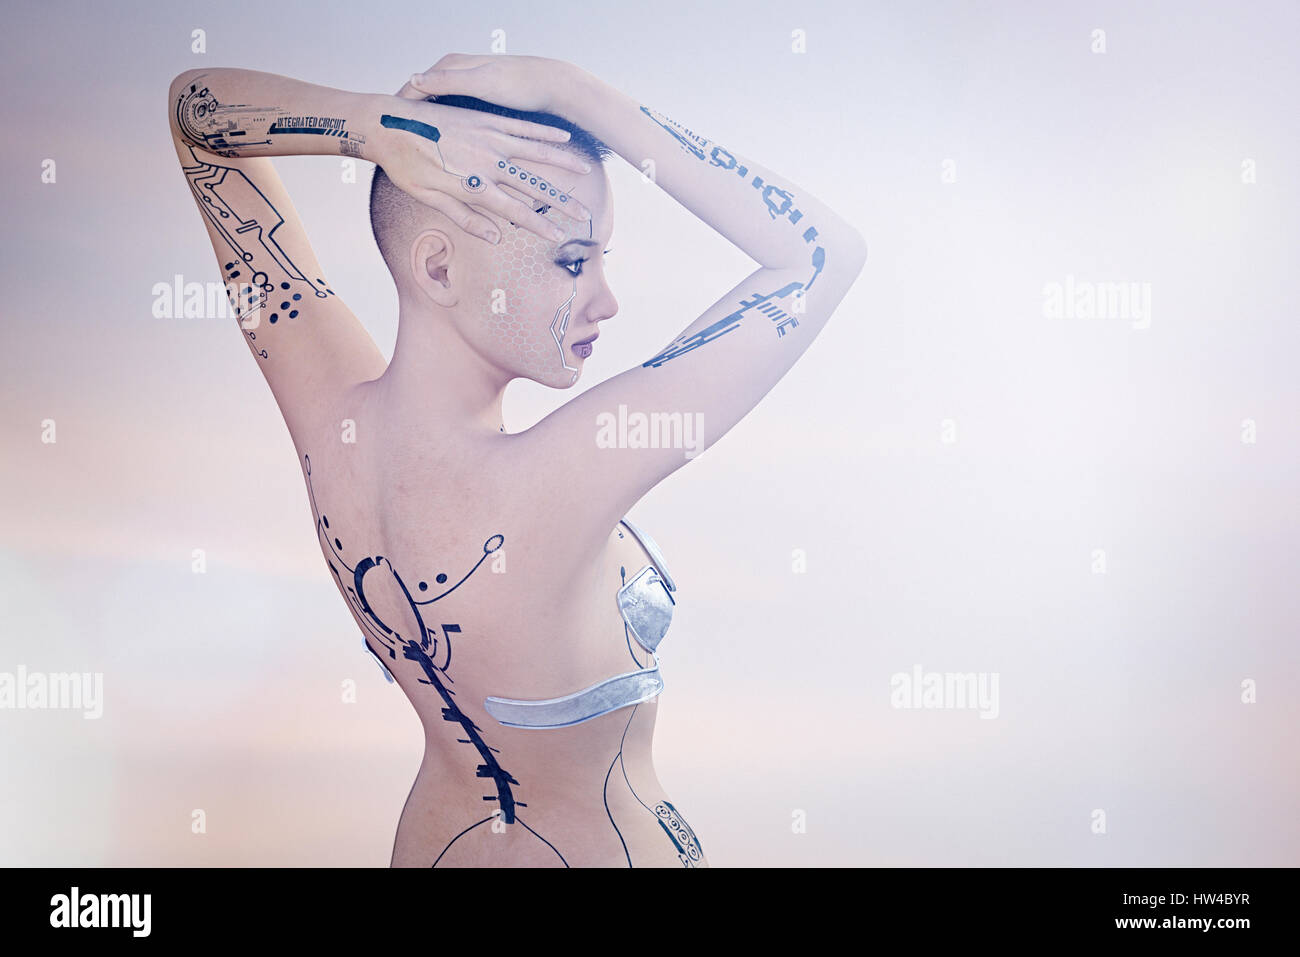 Tattoos on arms and back of futuristic woman Stock Photo